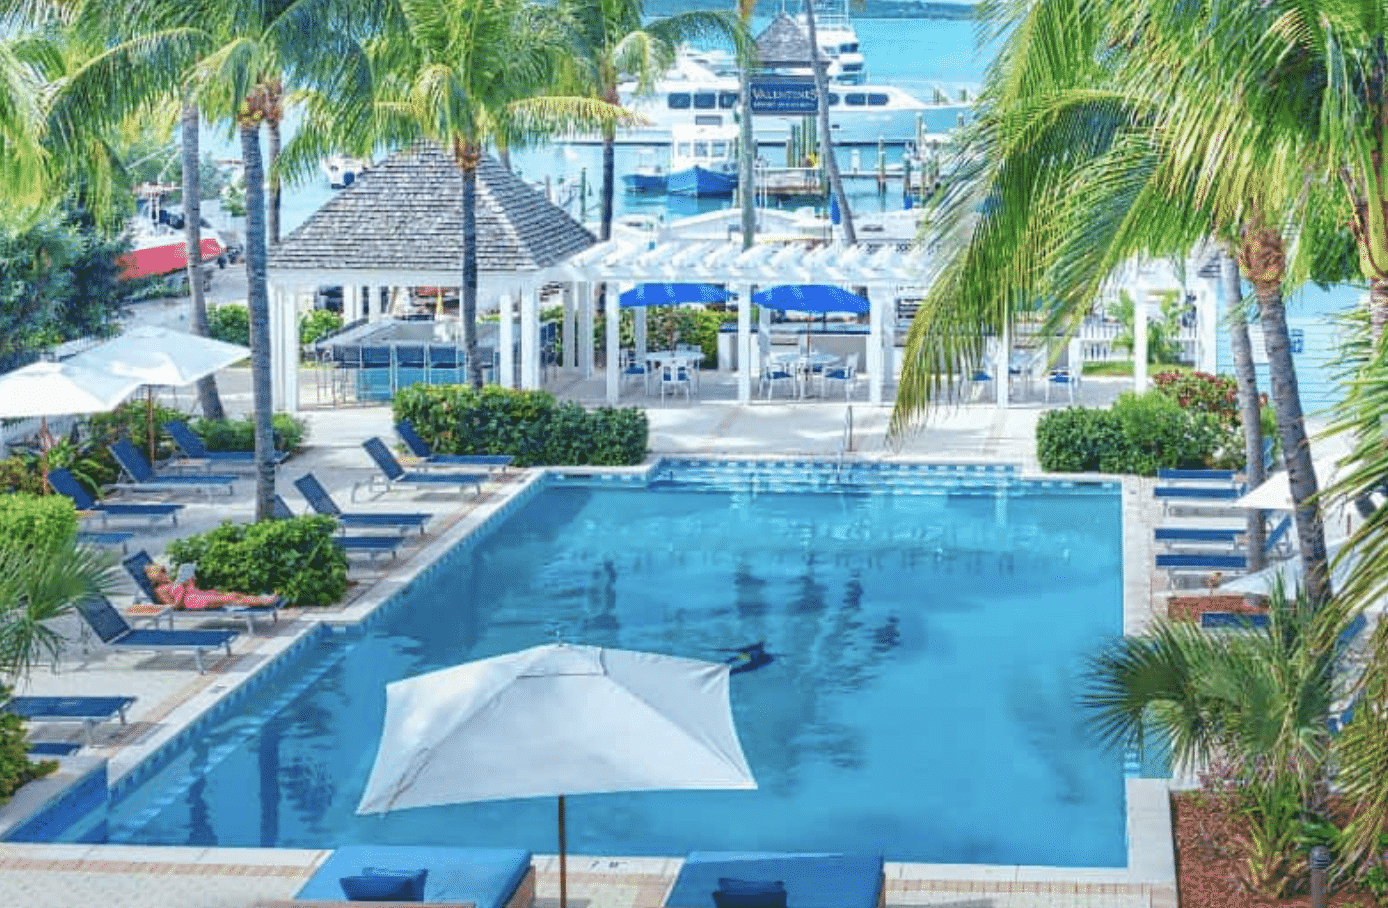 The 7 Best All-Inclusive Bahamas Resorts